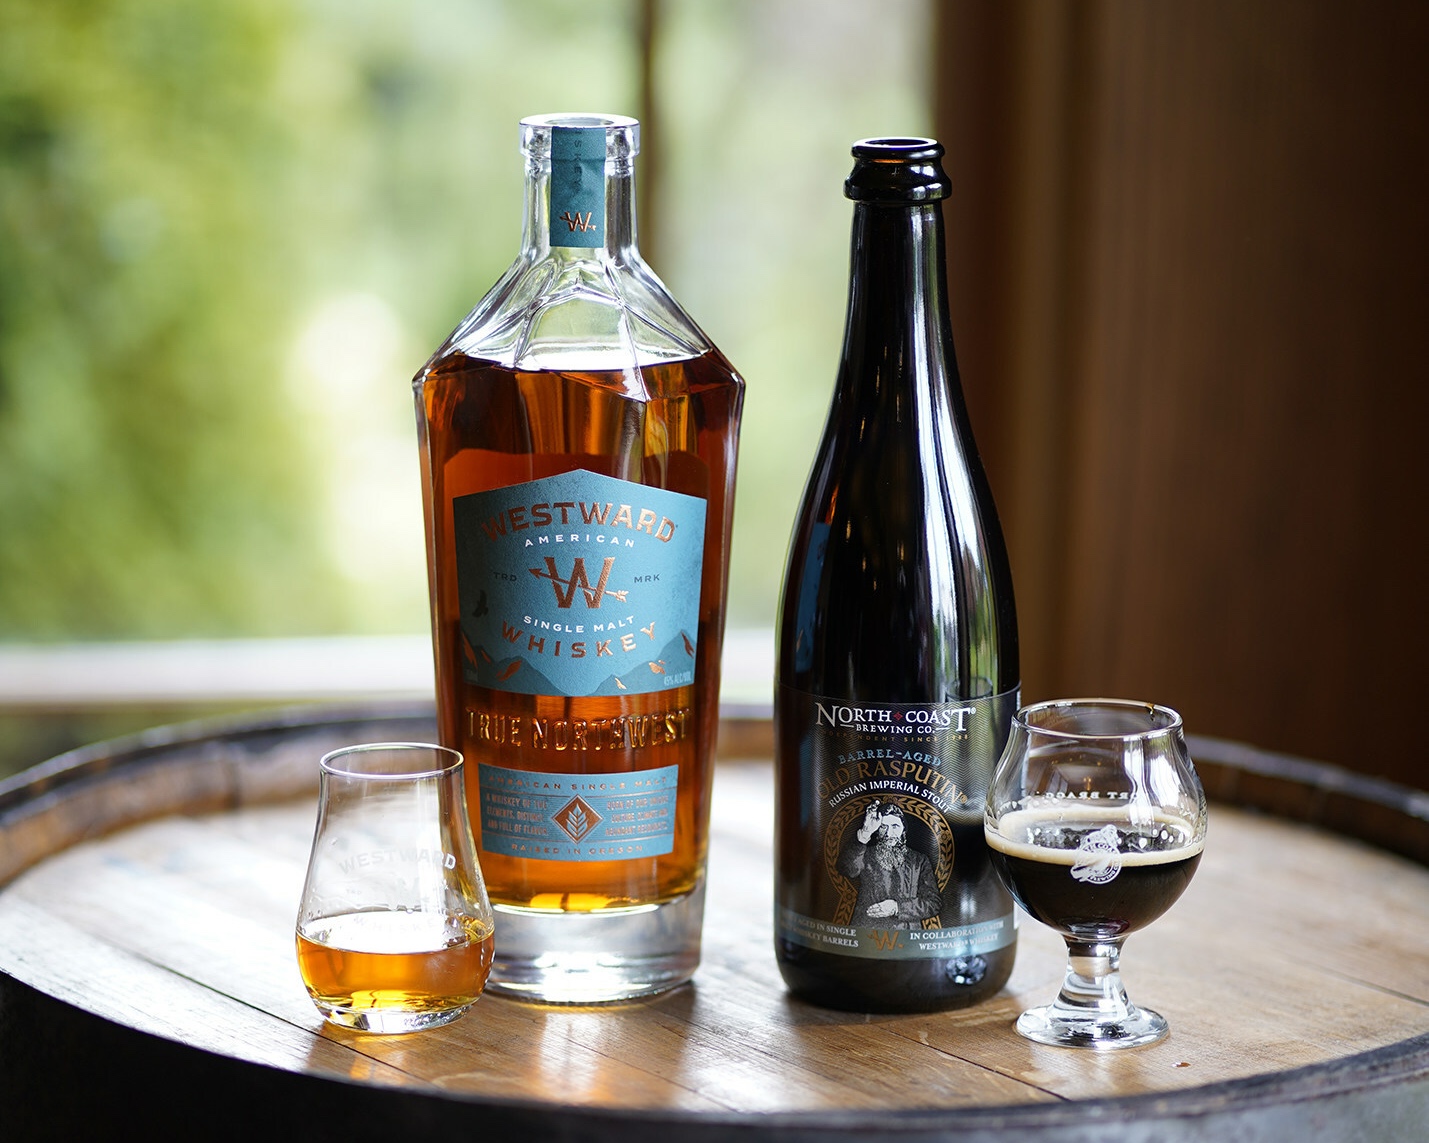 Westward Whiskey and North Coast Brewing Co. Forge Unique Cask Partnership